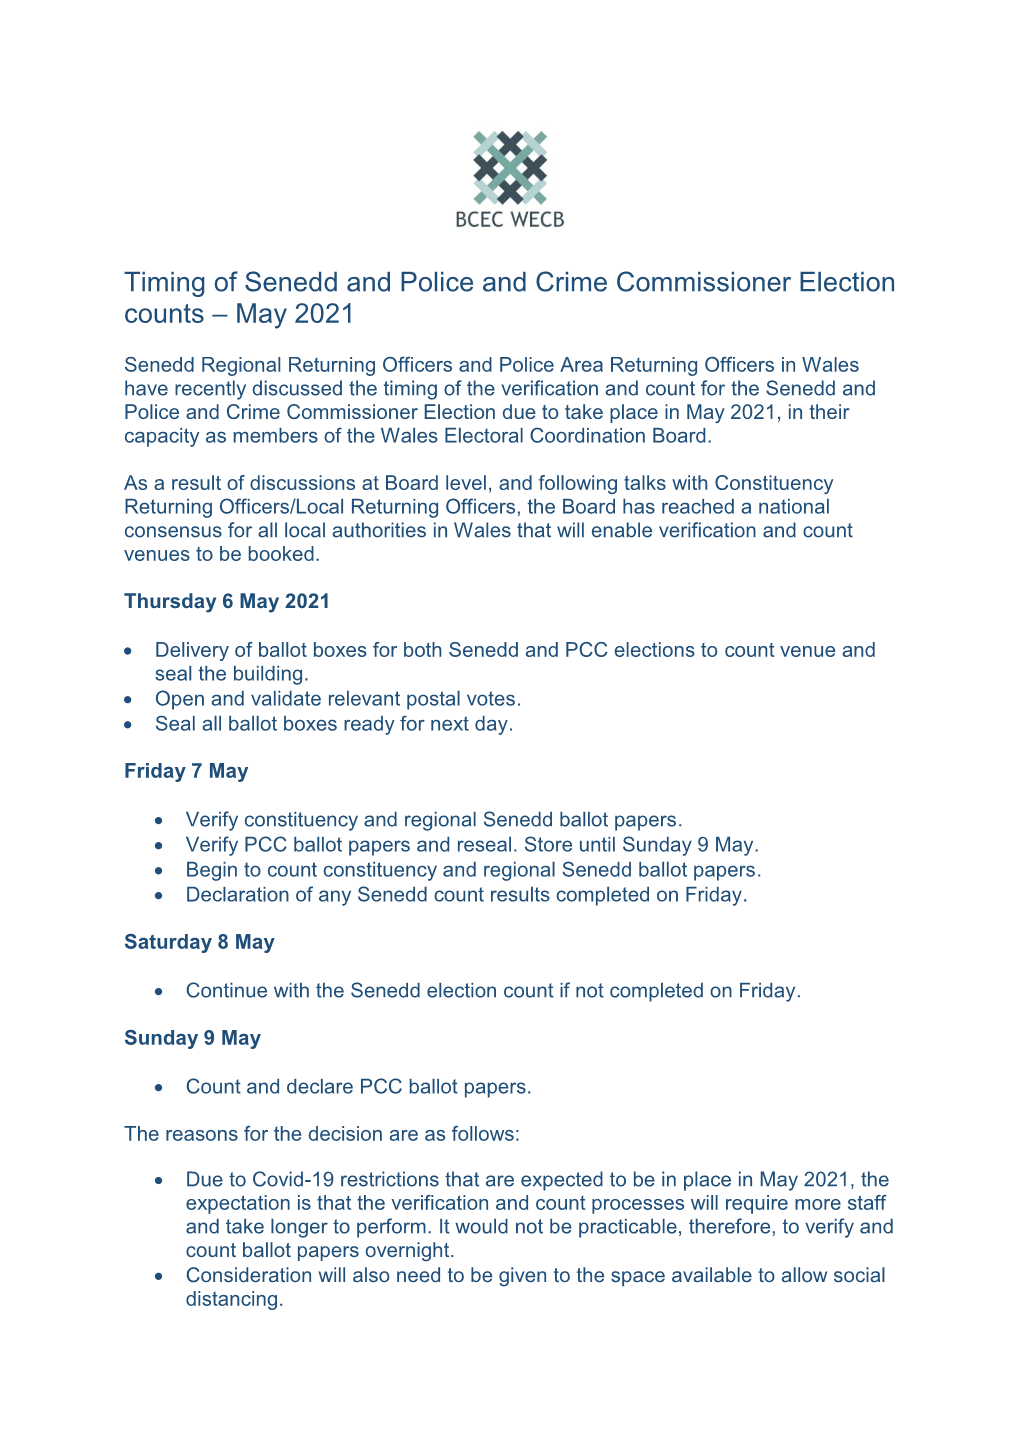 Timing of Senedd and Police and Crime Commissioner Election Counts – May 2021